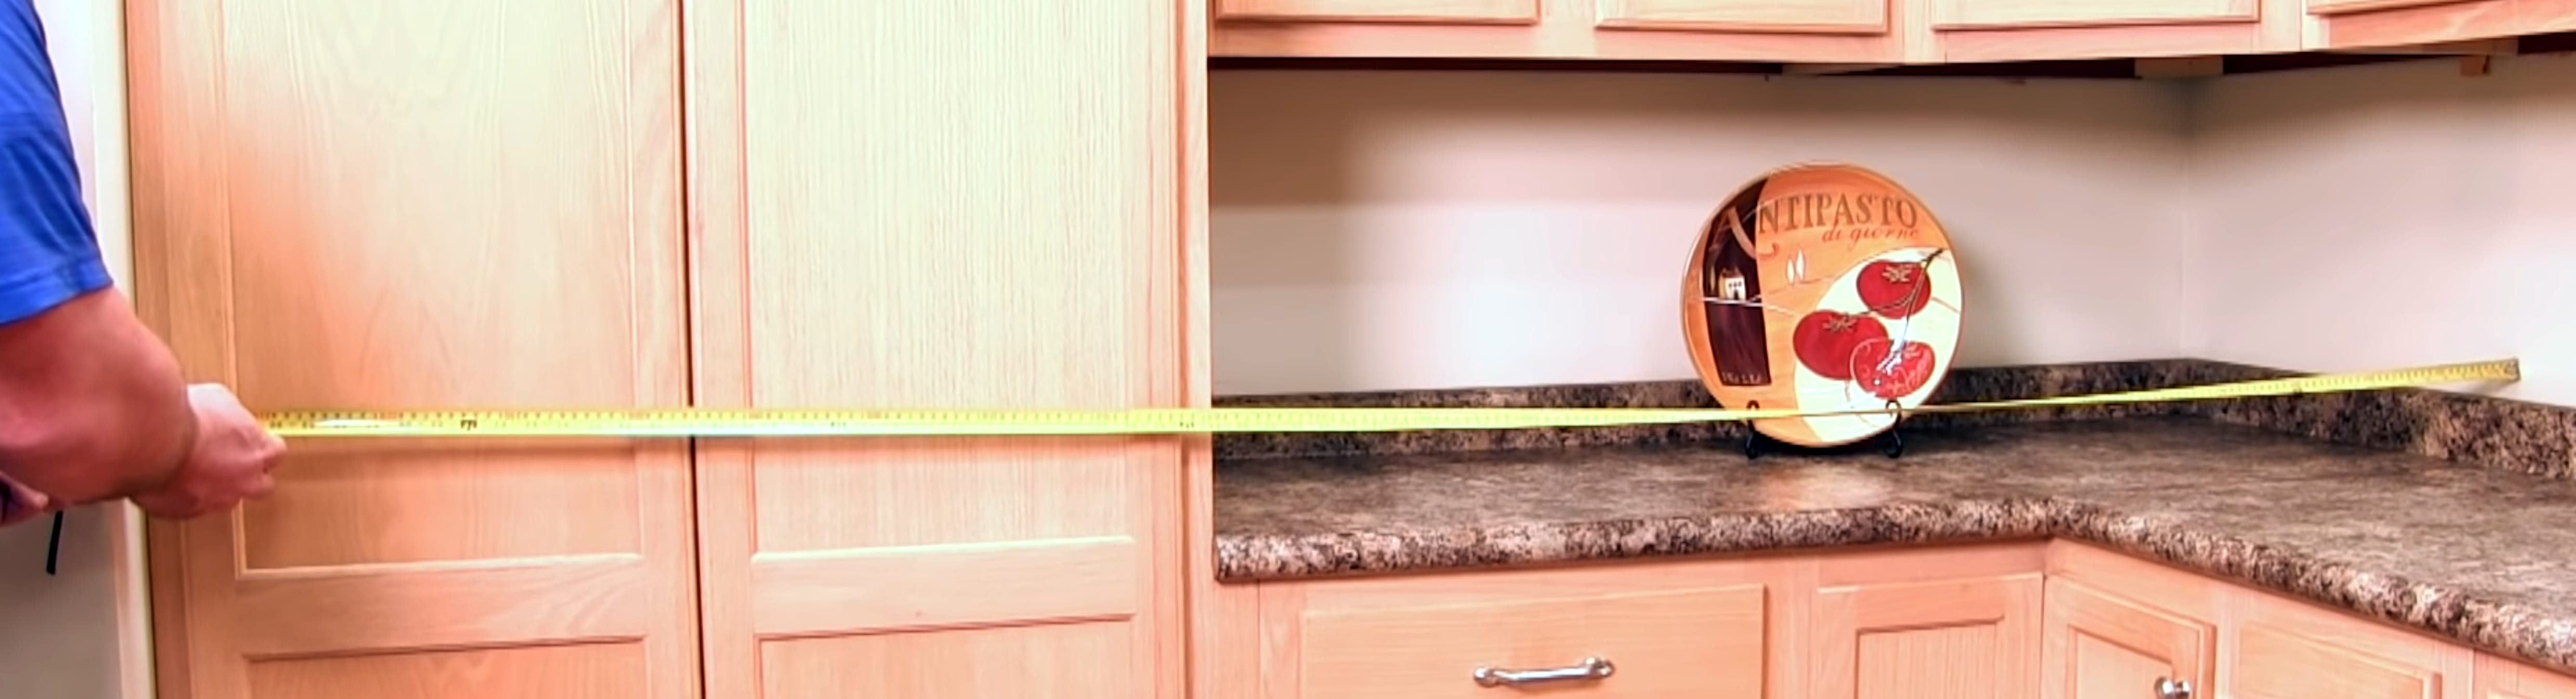 How To Measure Your Kitchen For New Cabinets